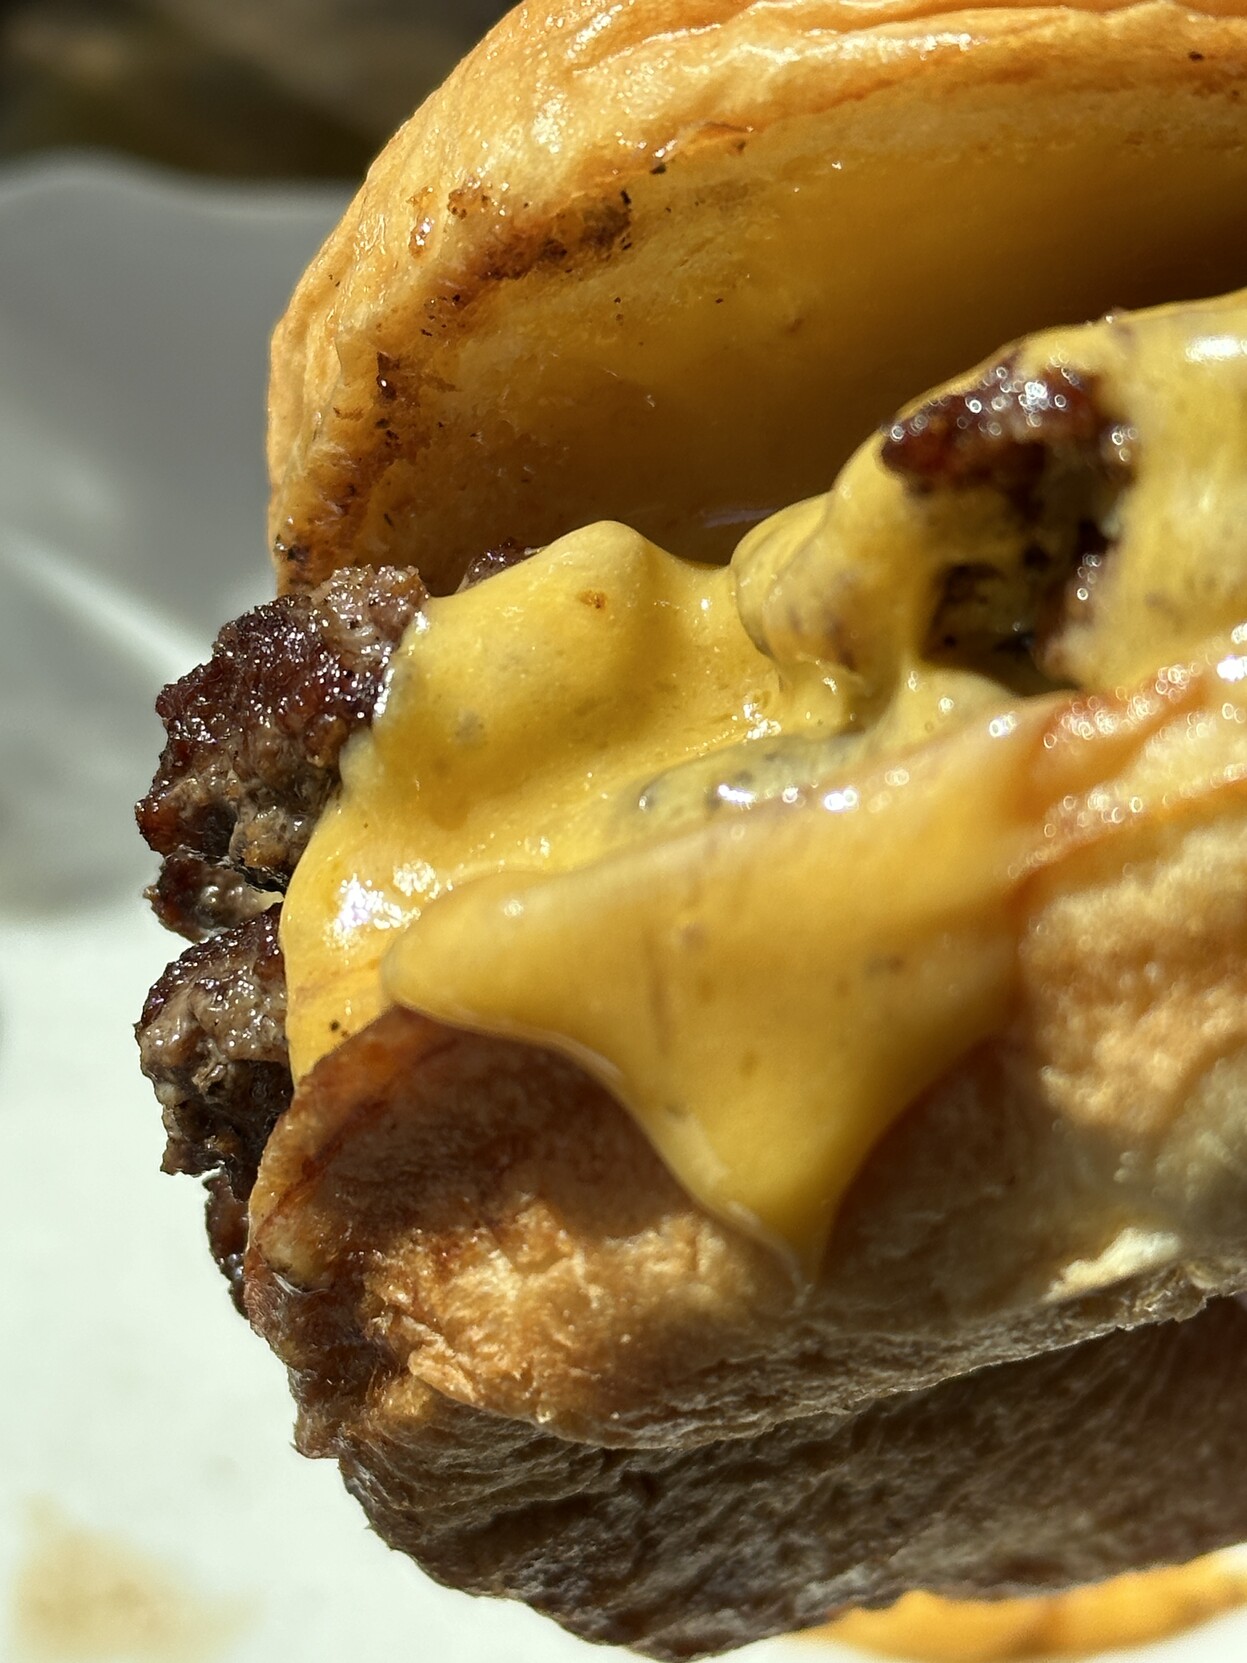 Closeup of the cheeseburger in sunlight with melted cheese dropping down the bun